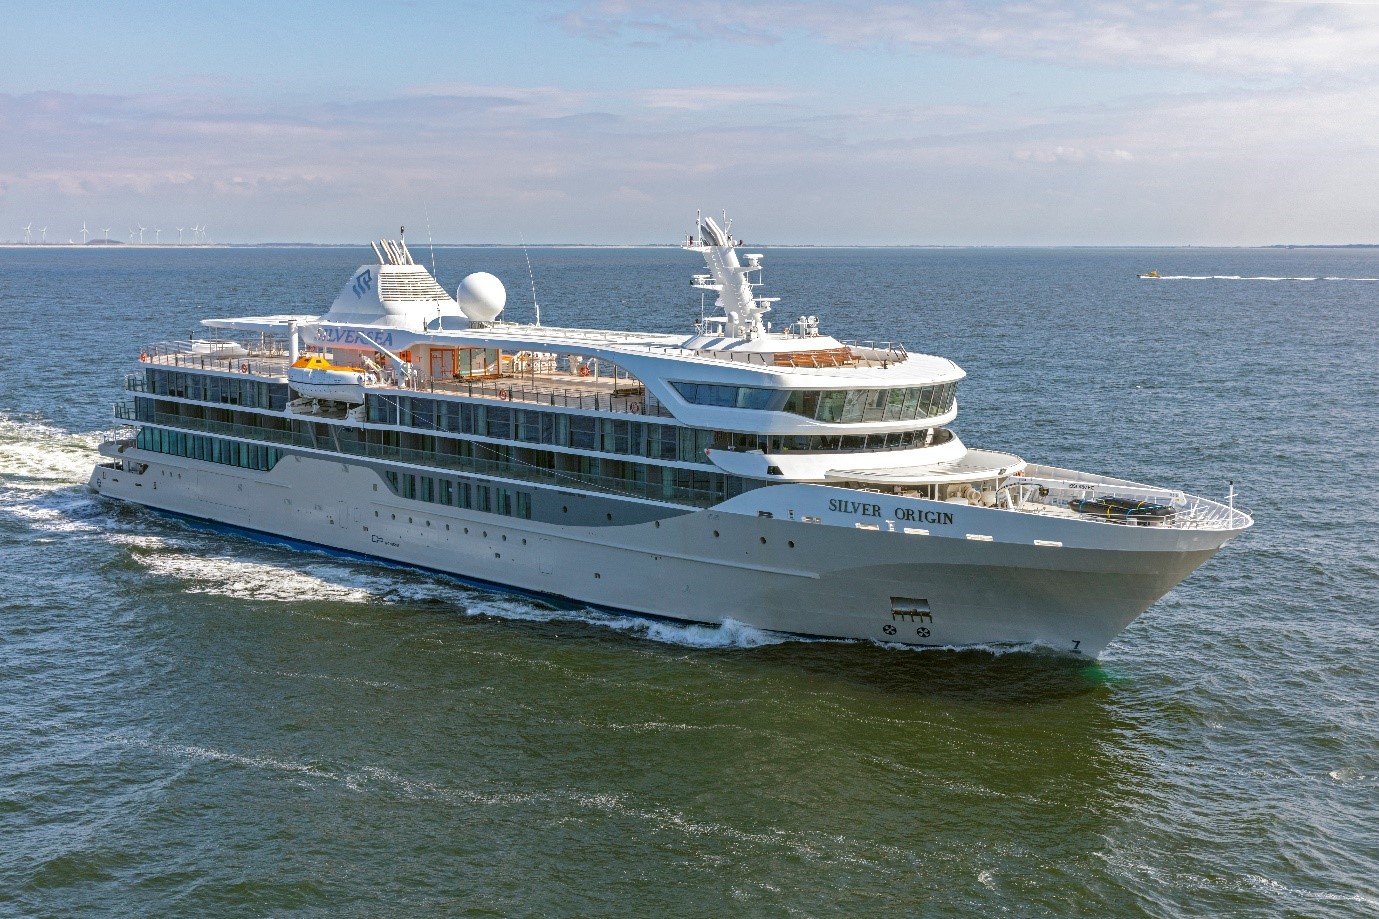 Silversea Cruises will recommence cruises among the Galápagos Islands with new itineraries aboard its new ship Silver Origin.